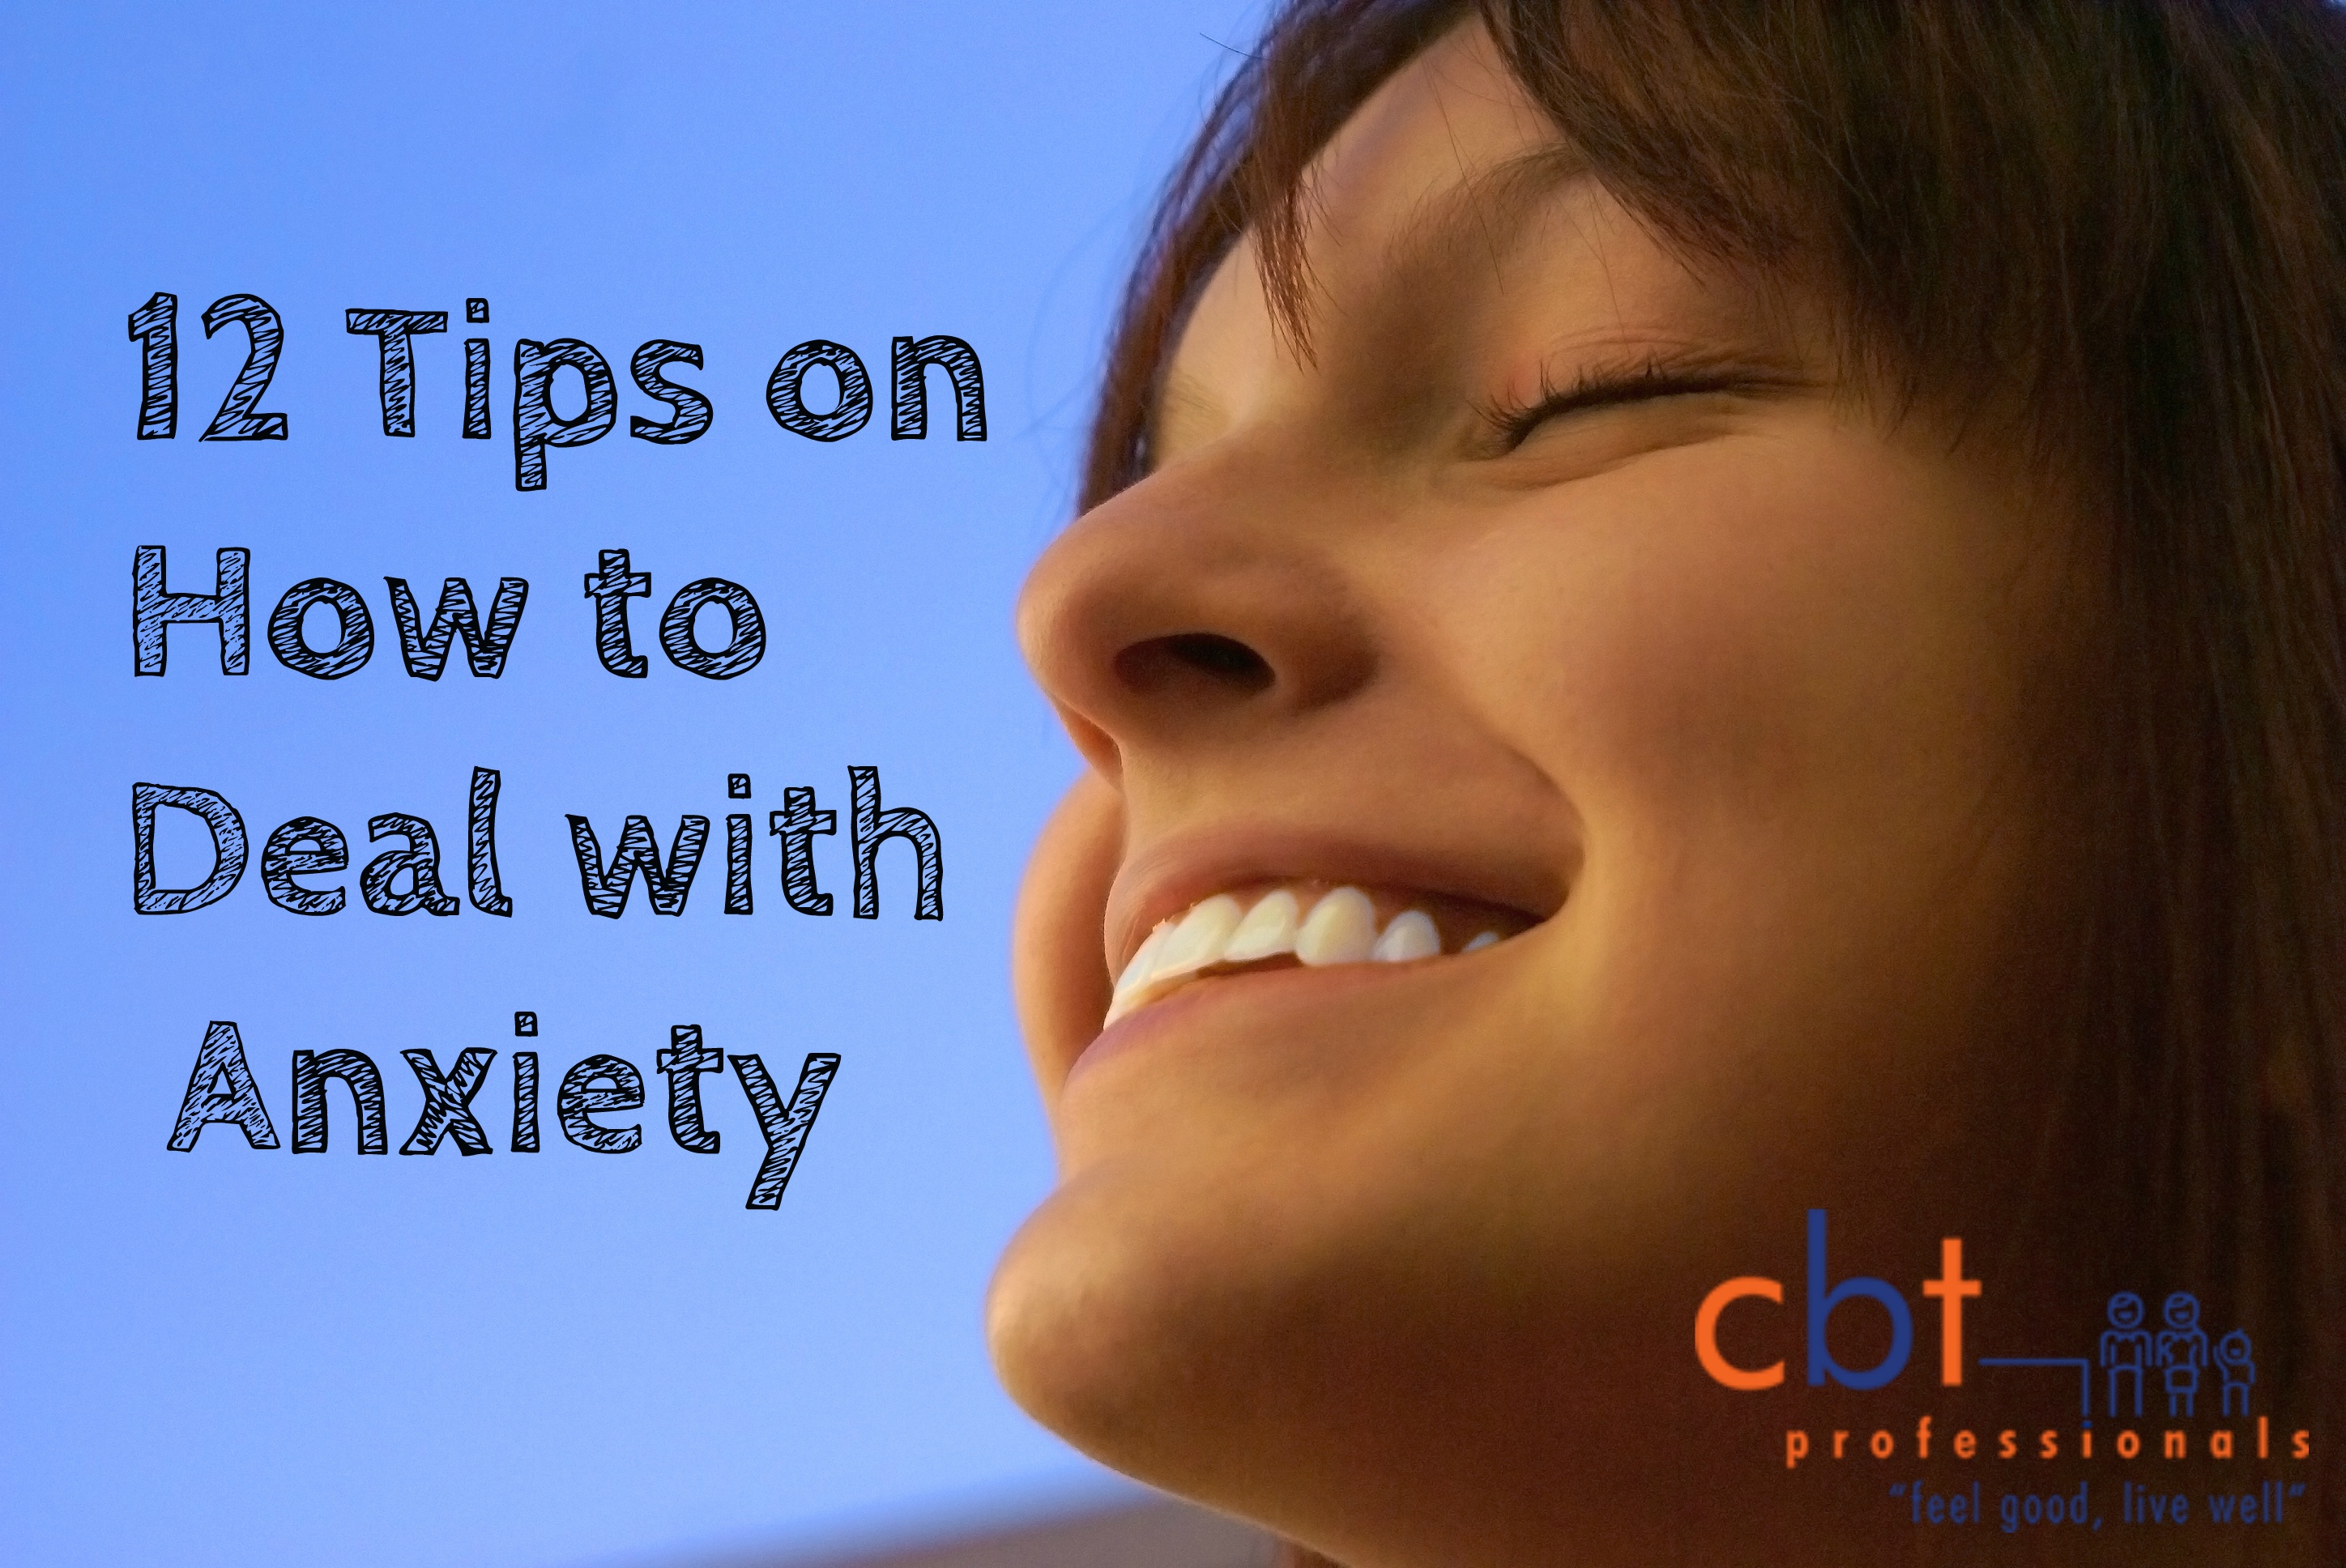 12 Tips on How to Deal with Anxiety